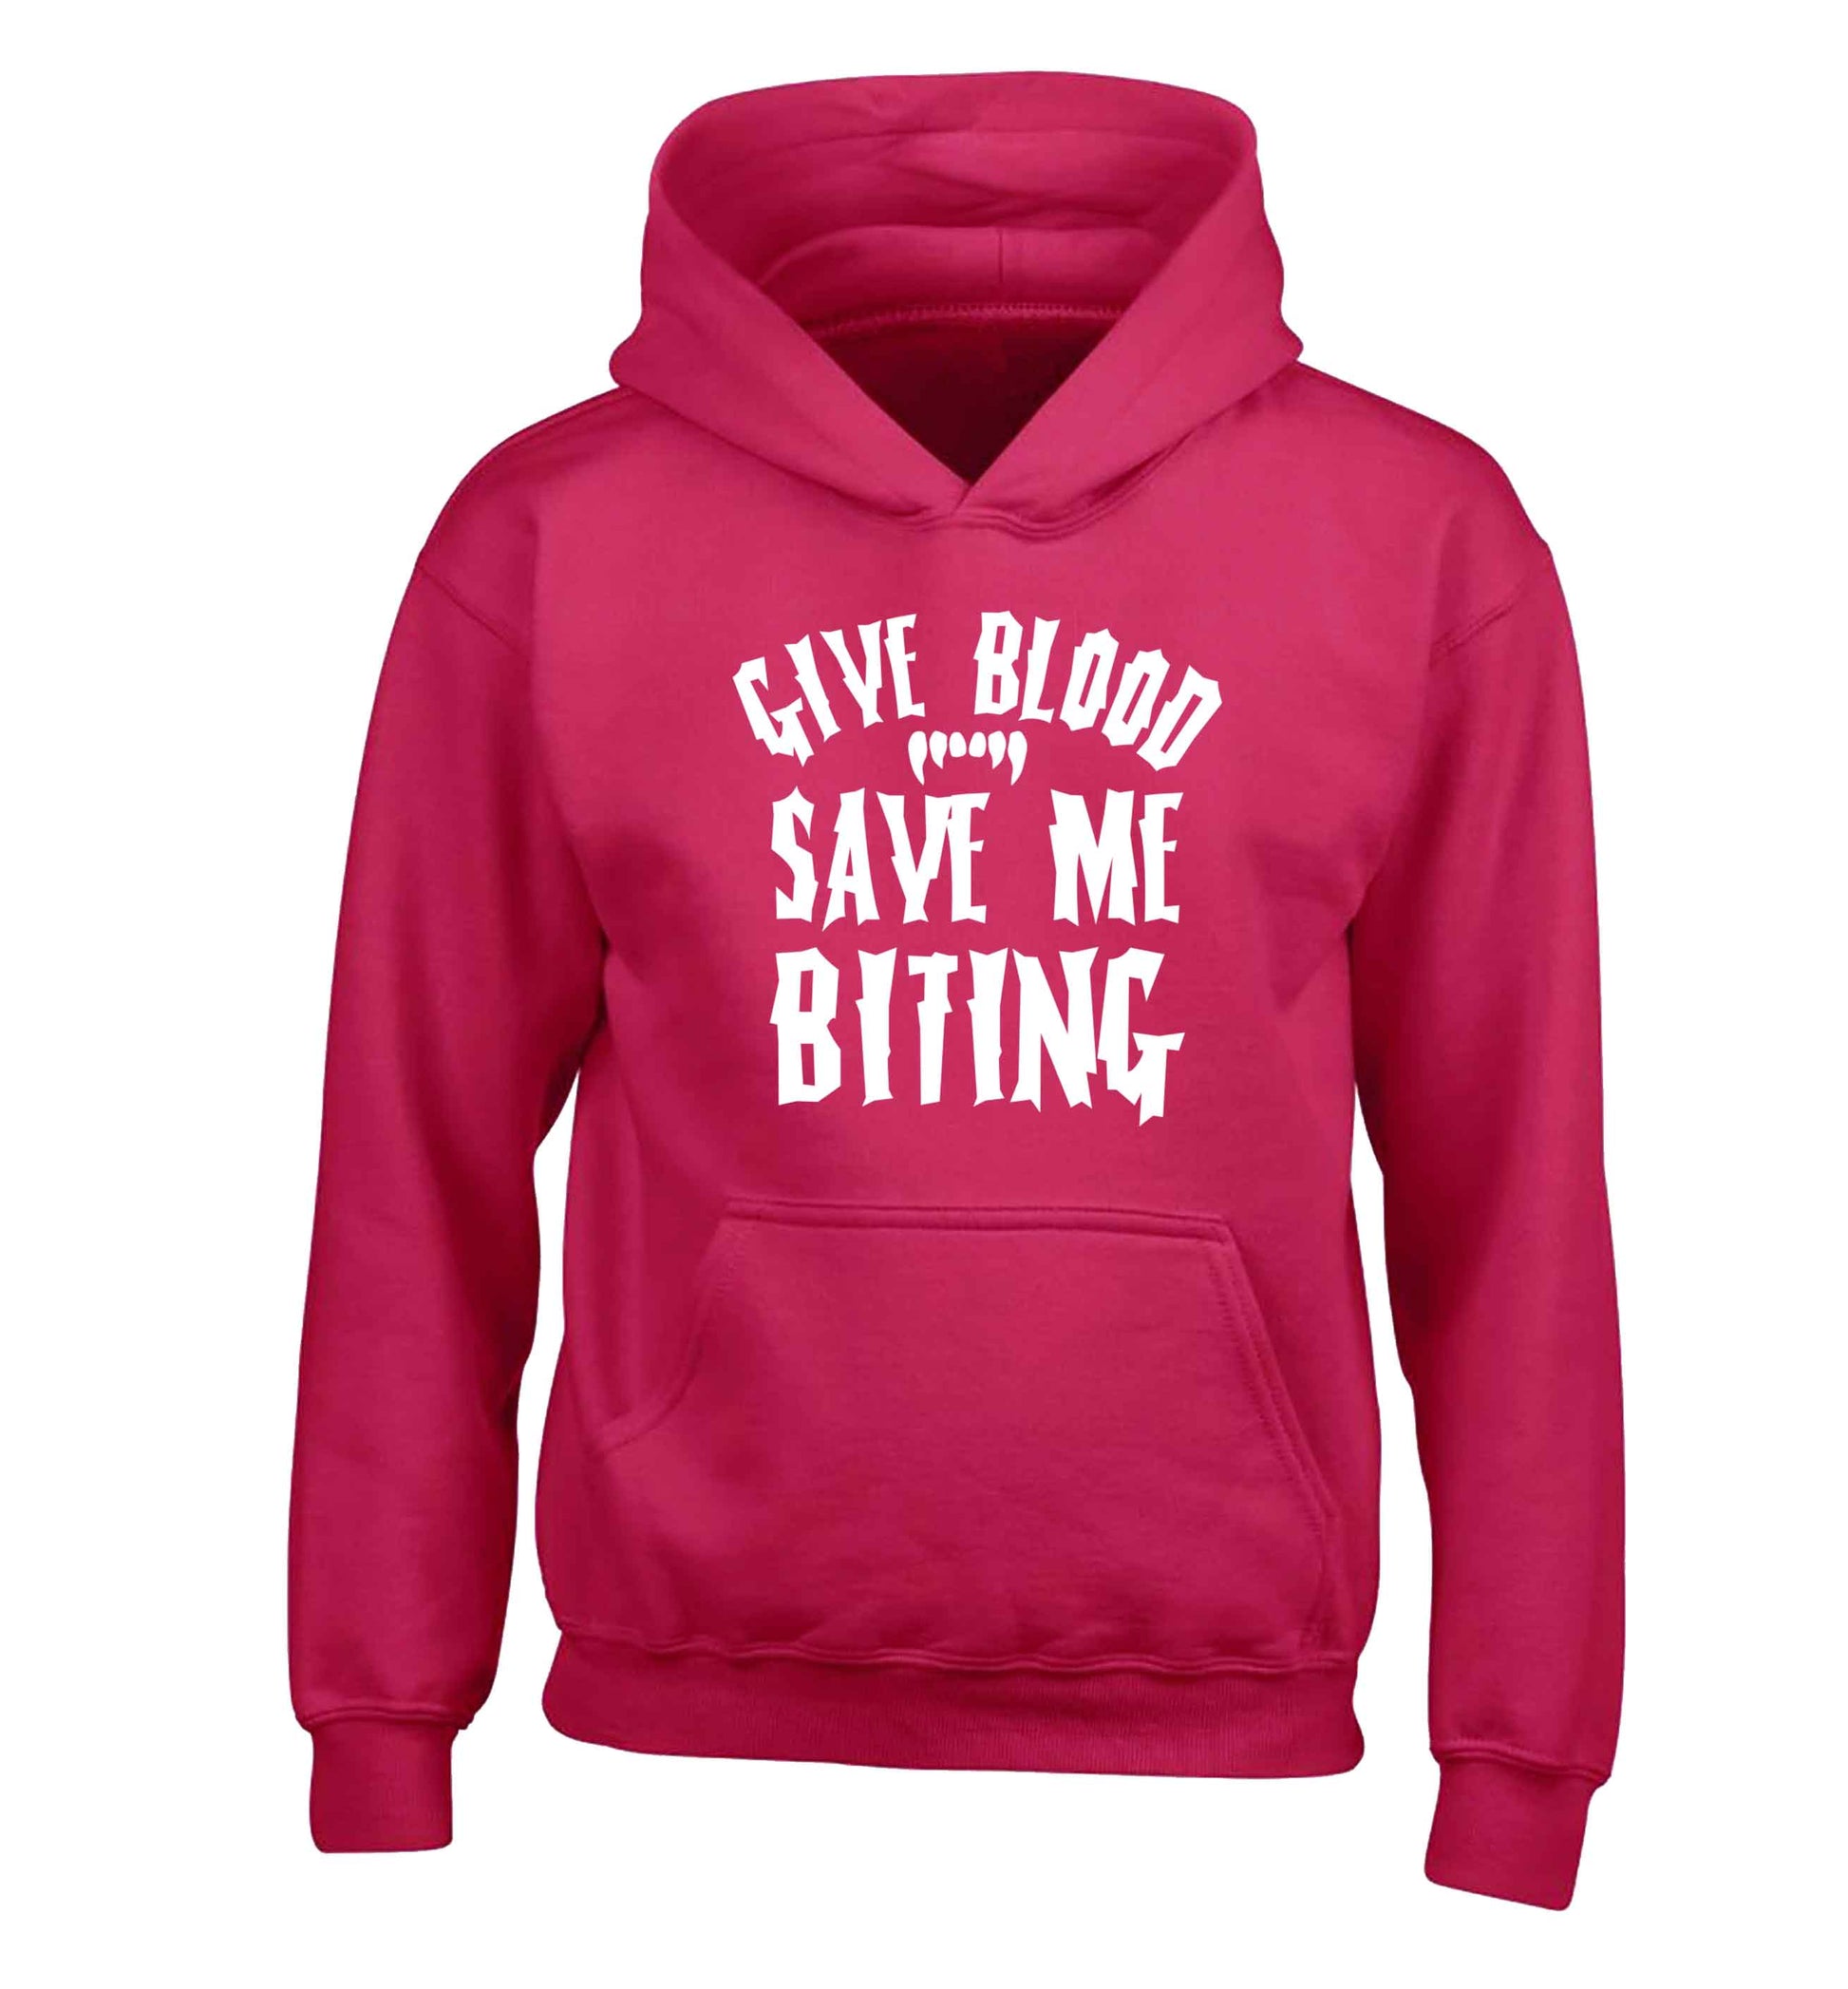 Give blood save me biting children's pink hoodie 12-13 Years